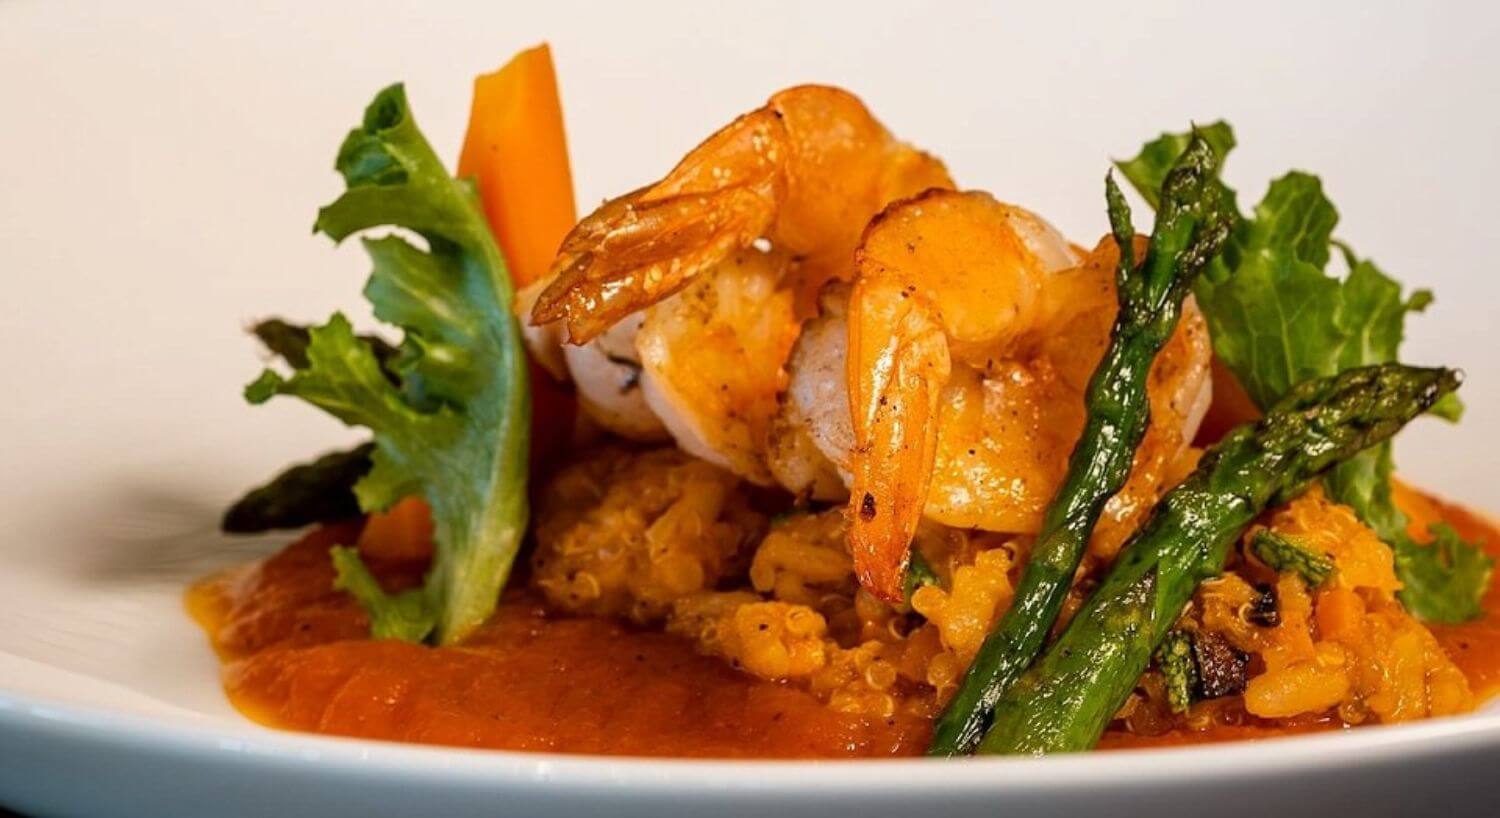 a plate with grilled shrimp, set atop rice and quinoa on a red sauce, garnished with green leaves and asparagus.